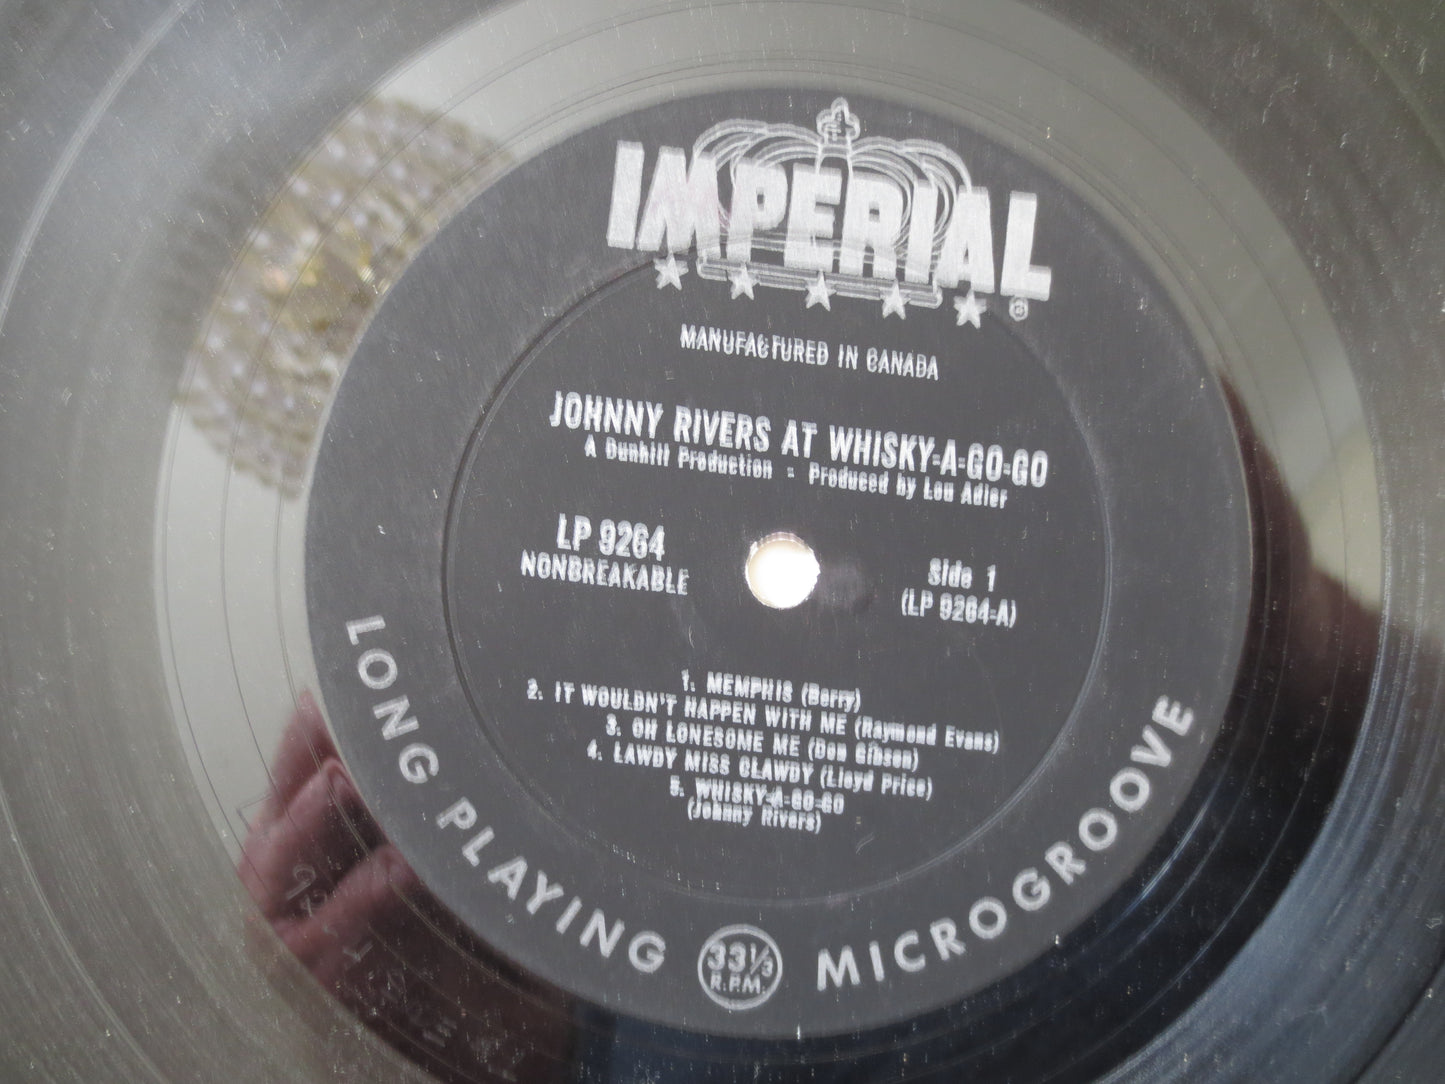 JOHNNY RIVERS, WHISKY a Go Go, Johnny Rivers Lp, Vintage Vinyl, Record Vinyl, Record, Vinyl Record, Vinyl Lp, 1964 Records